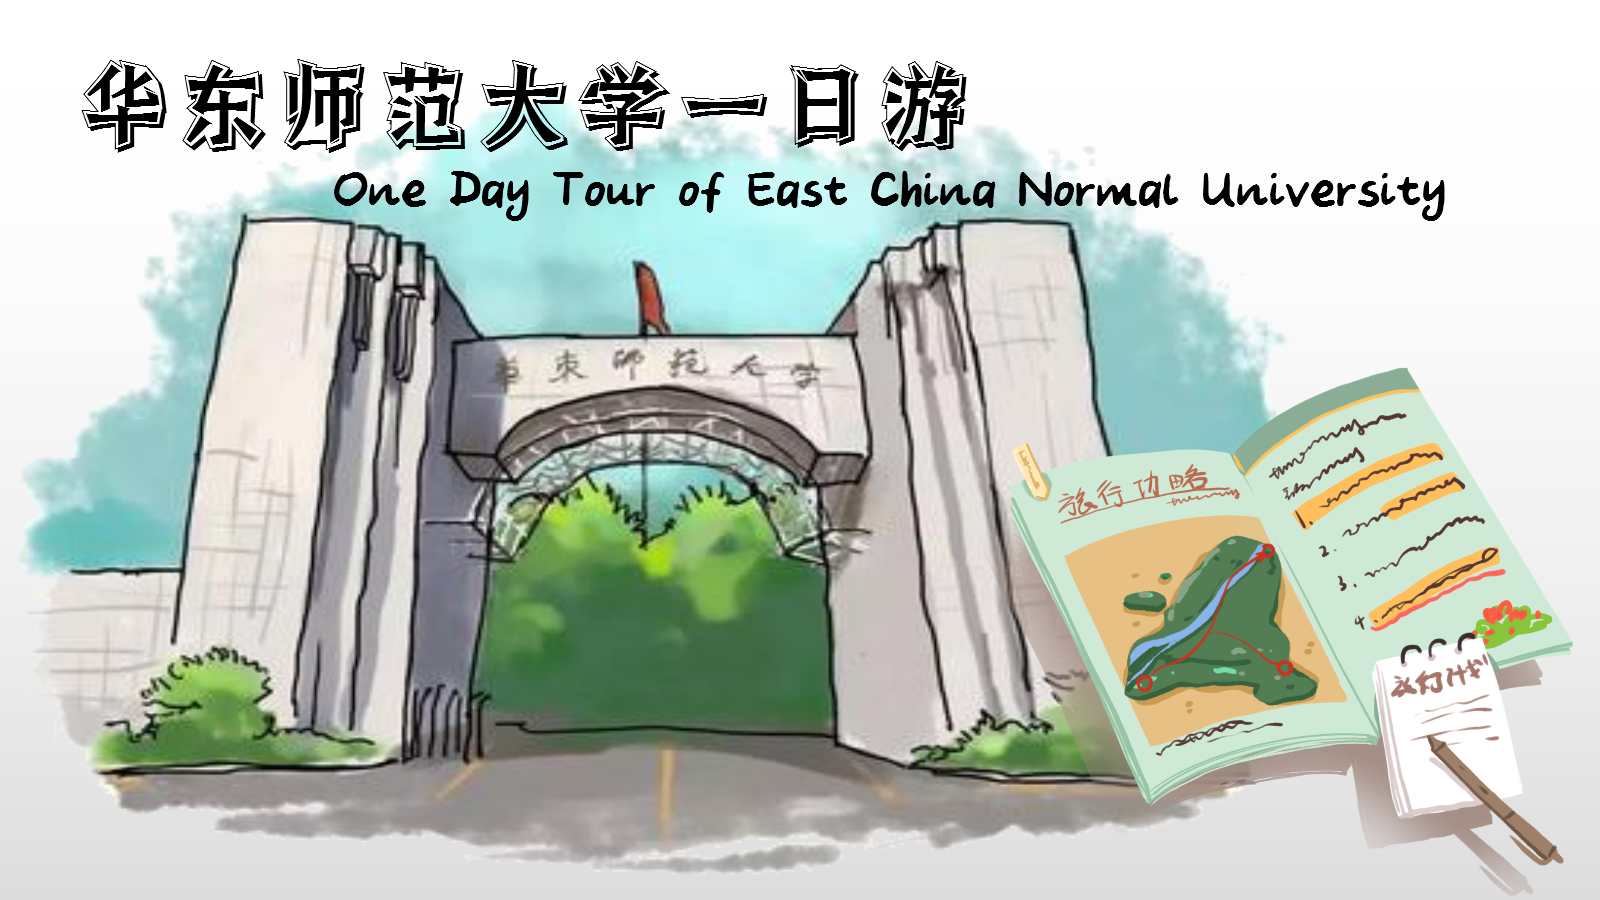 One Day Tour of East China Normal University